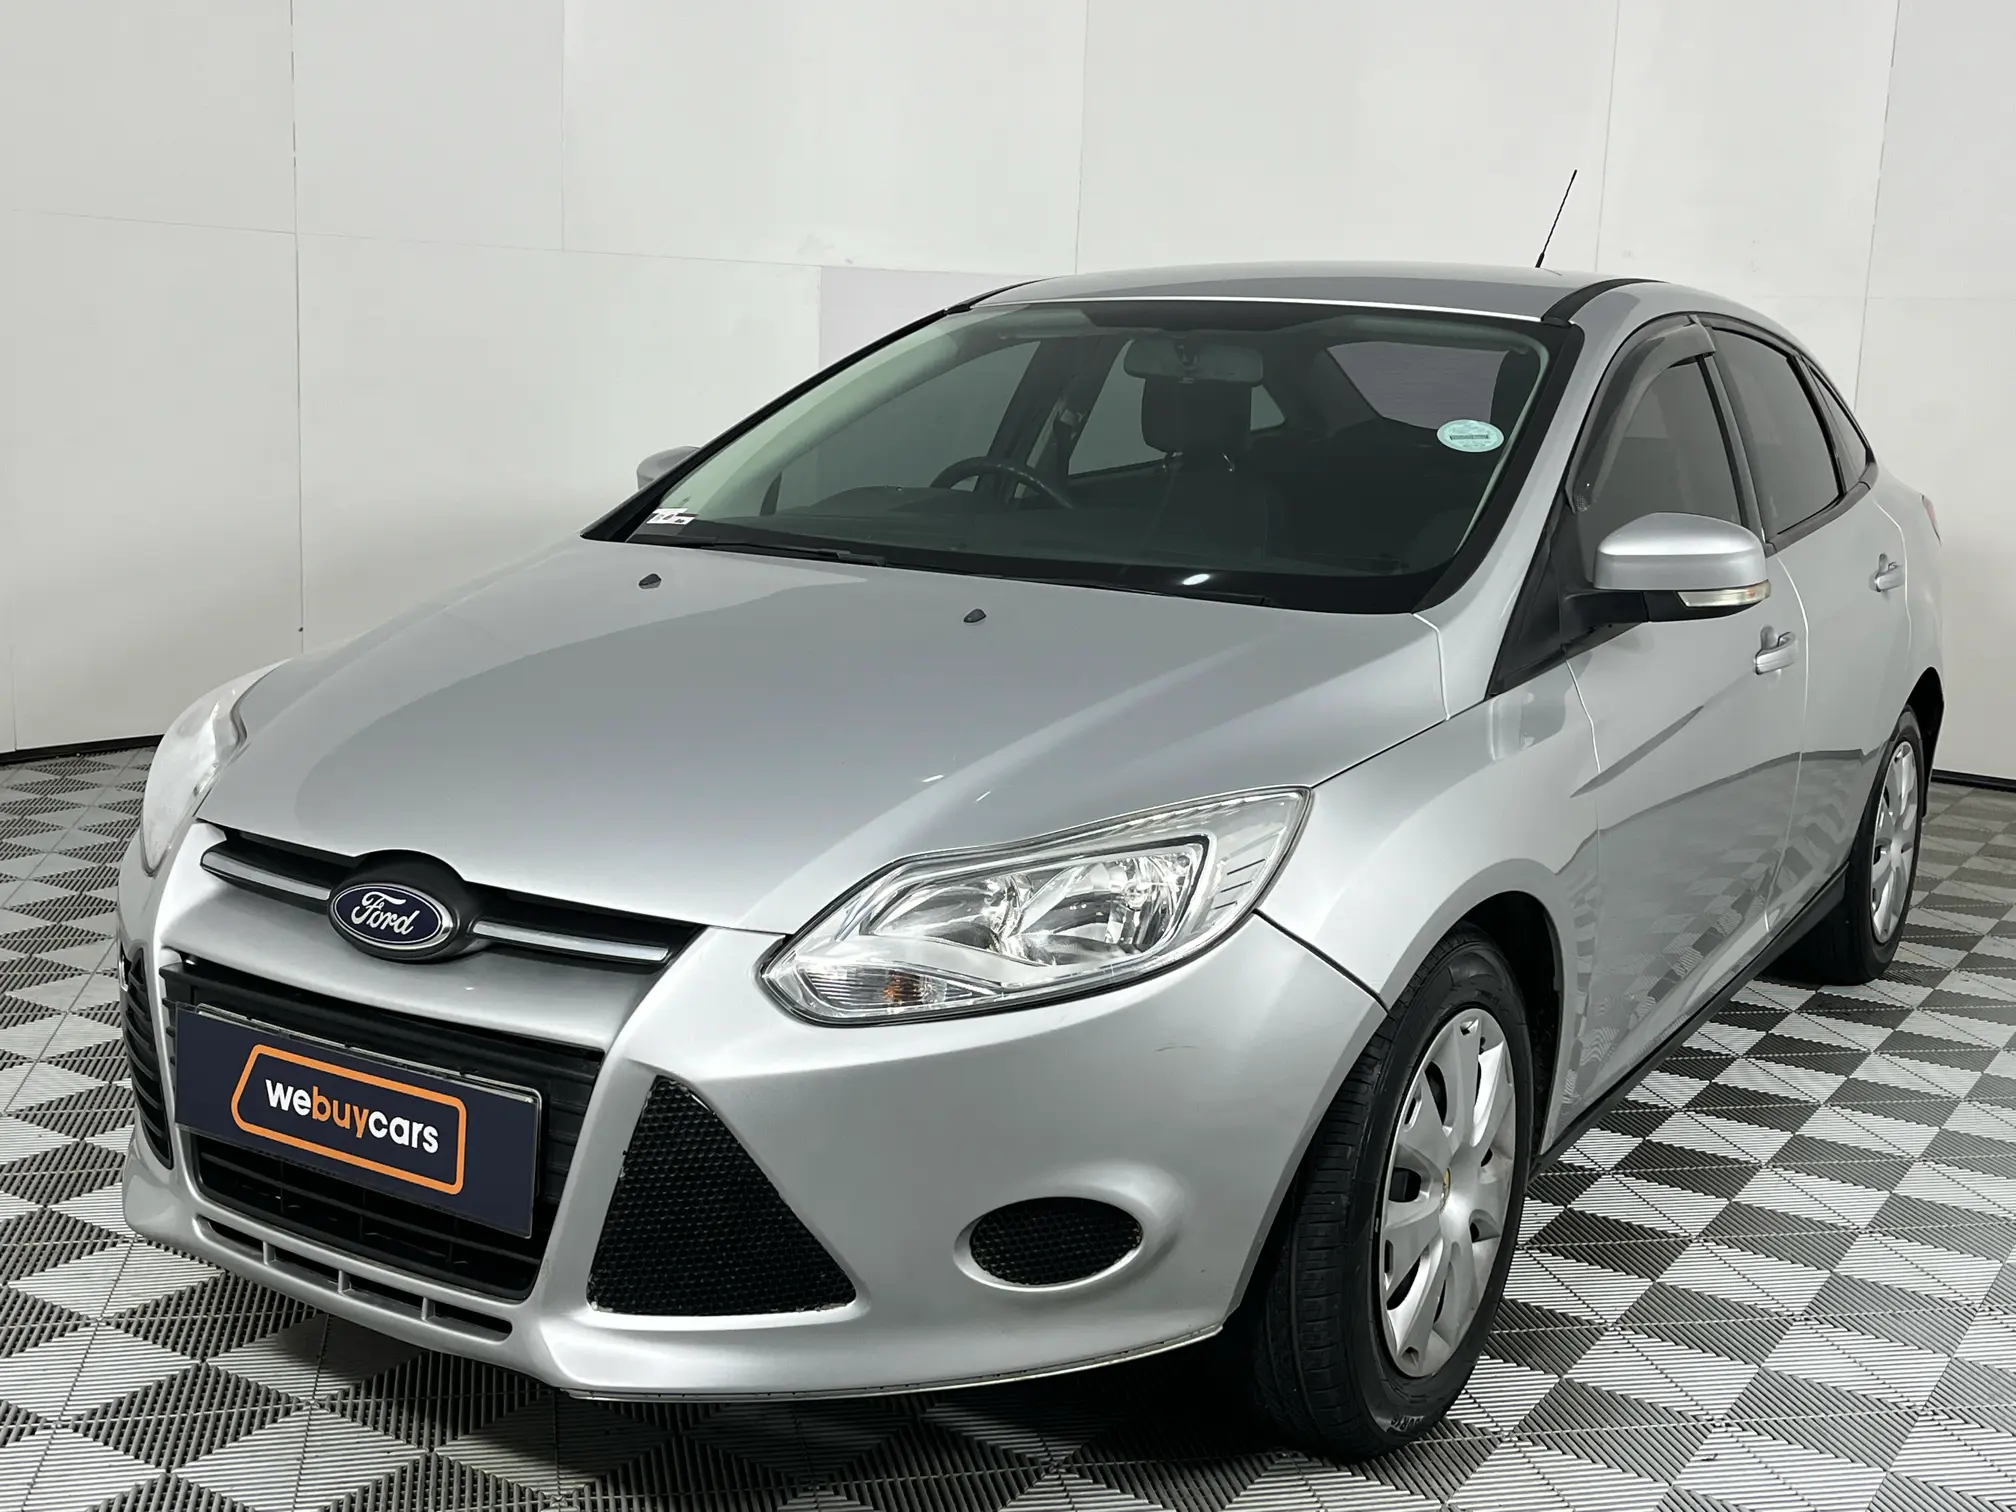 2014 Ford Focus 1.6 TI VCT Ambiente 5-Door